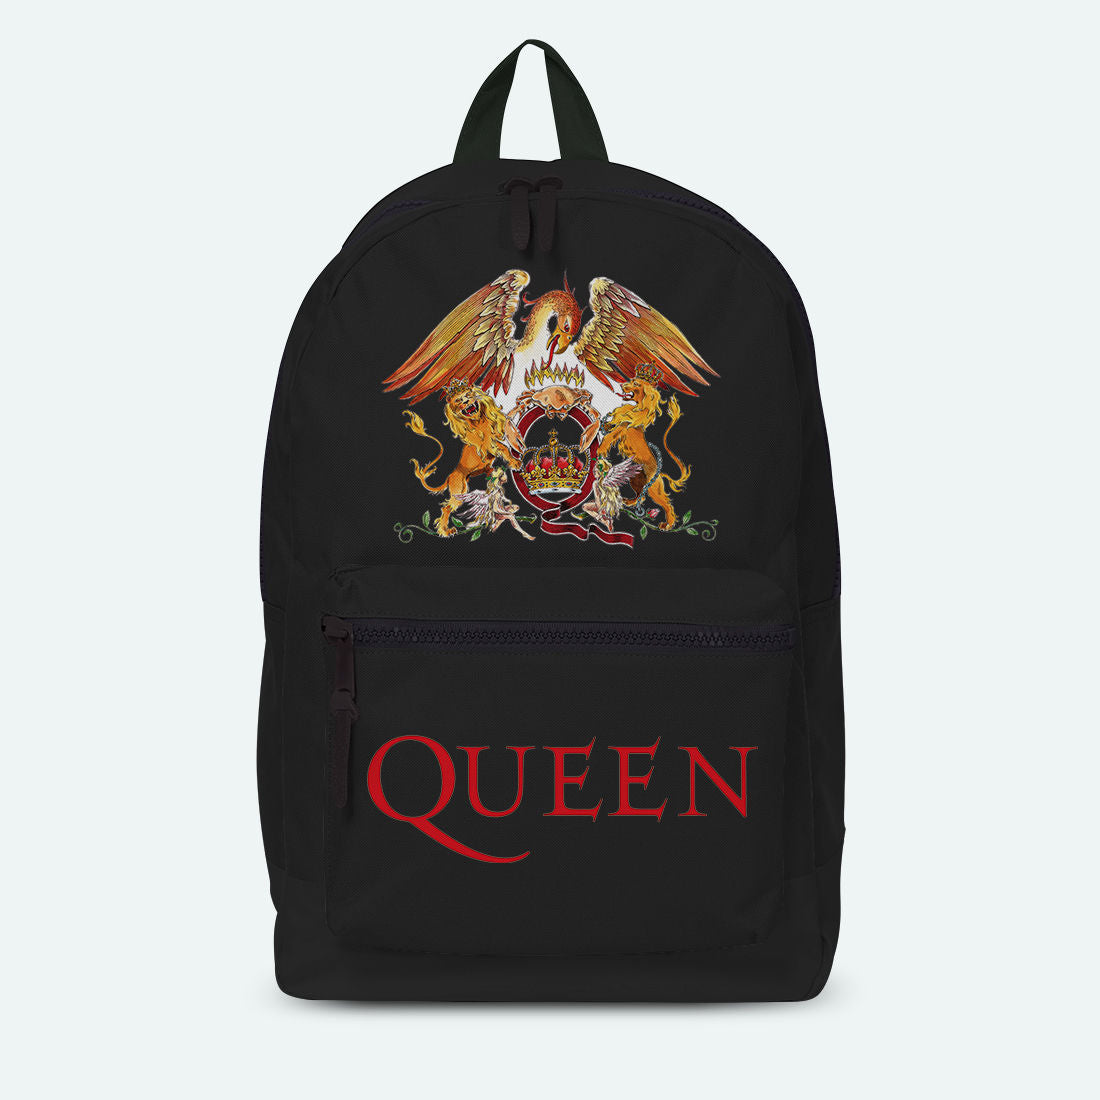 Queen - Classic Crest Classic Backpack